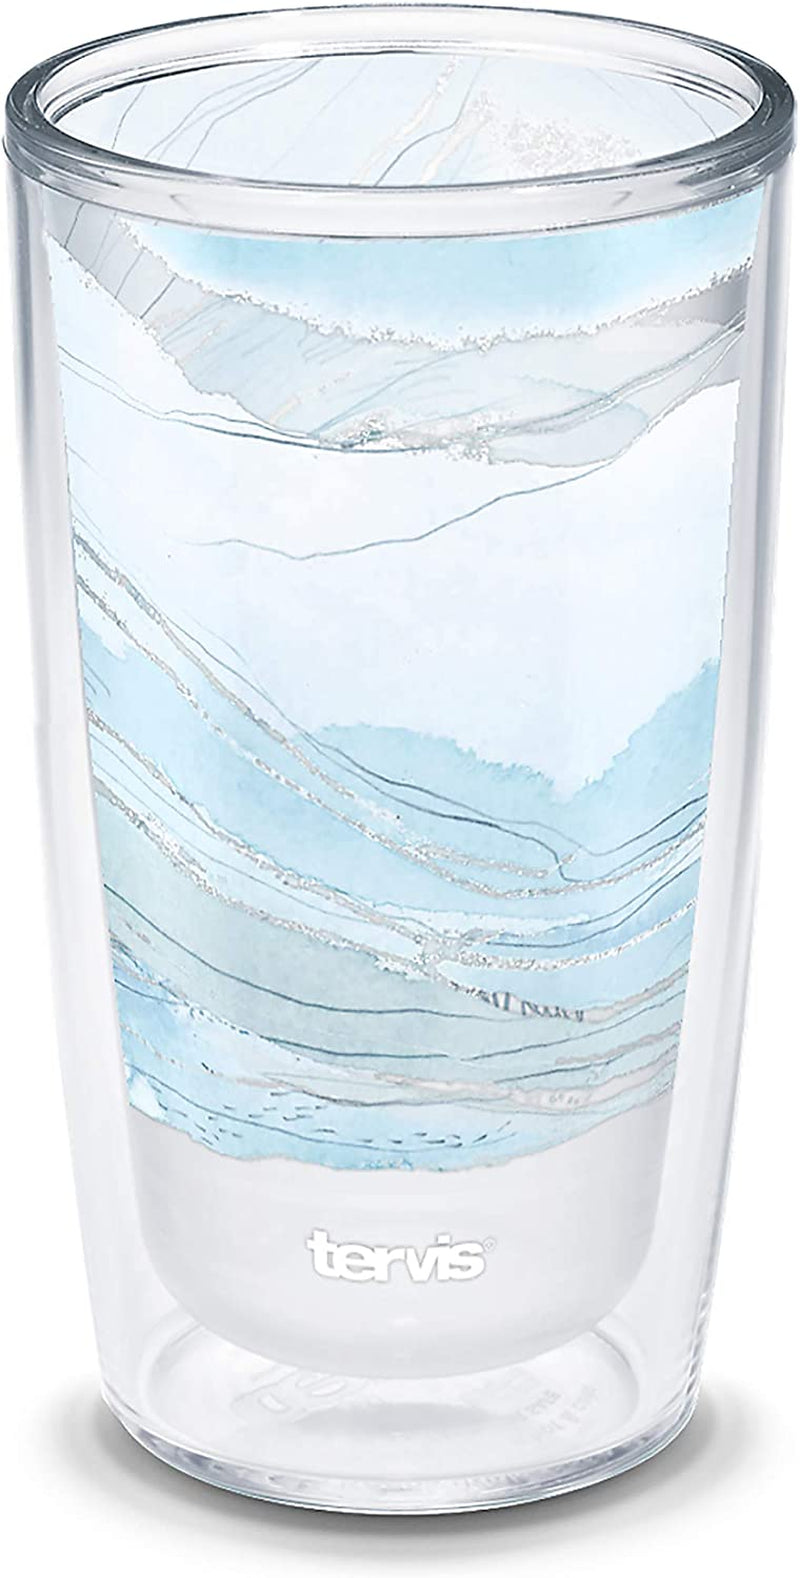 Tervis Made in USA Double Walled Kelly Ventura Insulated Tumbler Cup Keeps Drinks Cold & Hot, 16Oz 4Pk, Hillside Home & Garden > Kitchen & Dining > Tableware > Drinkware Tervis Currents 16oz 